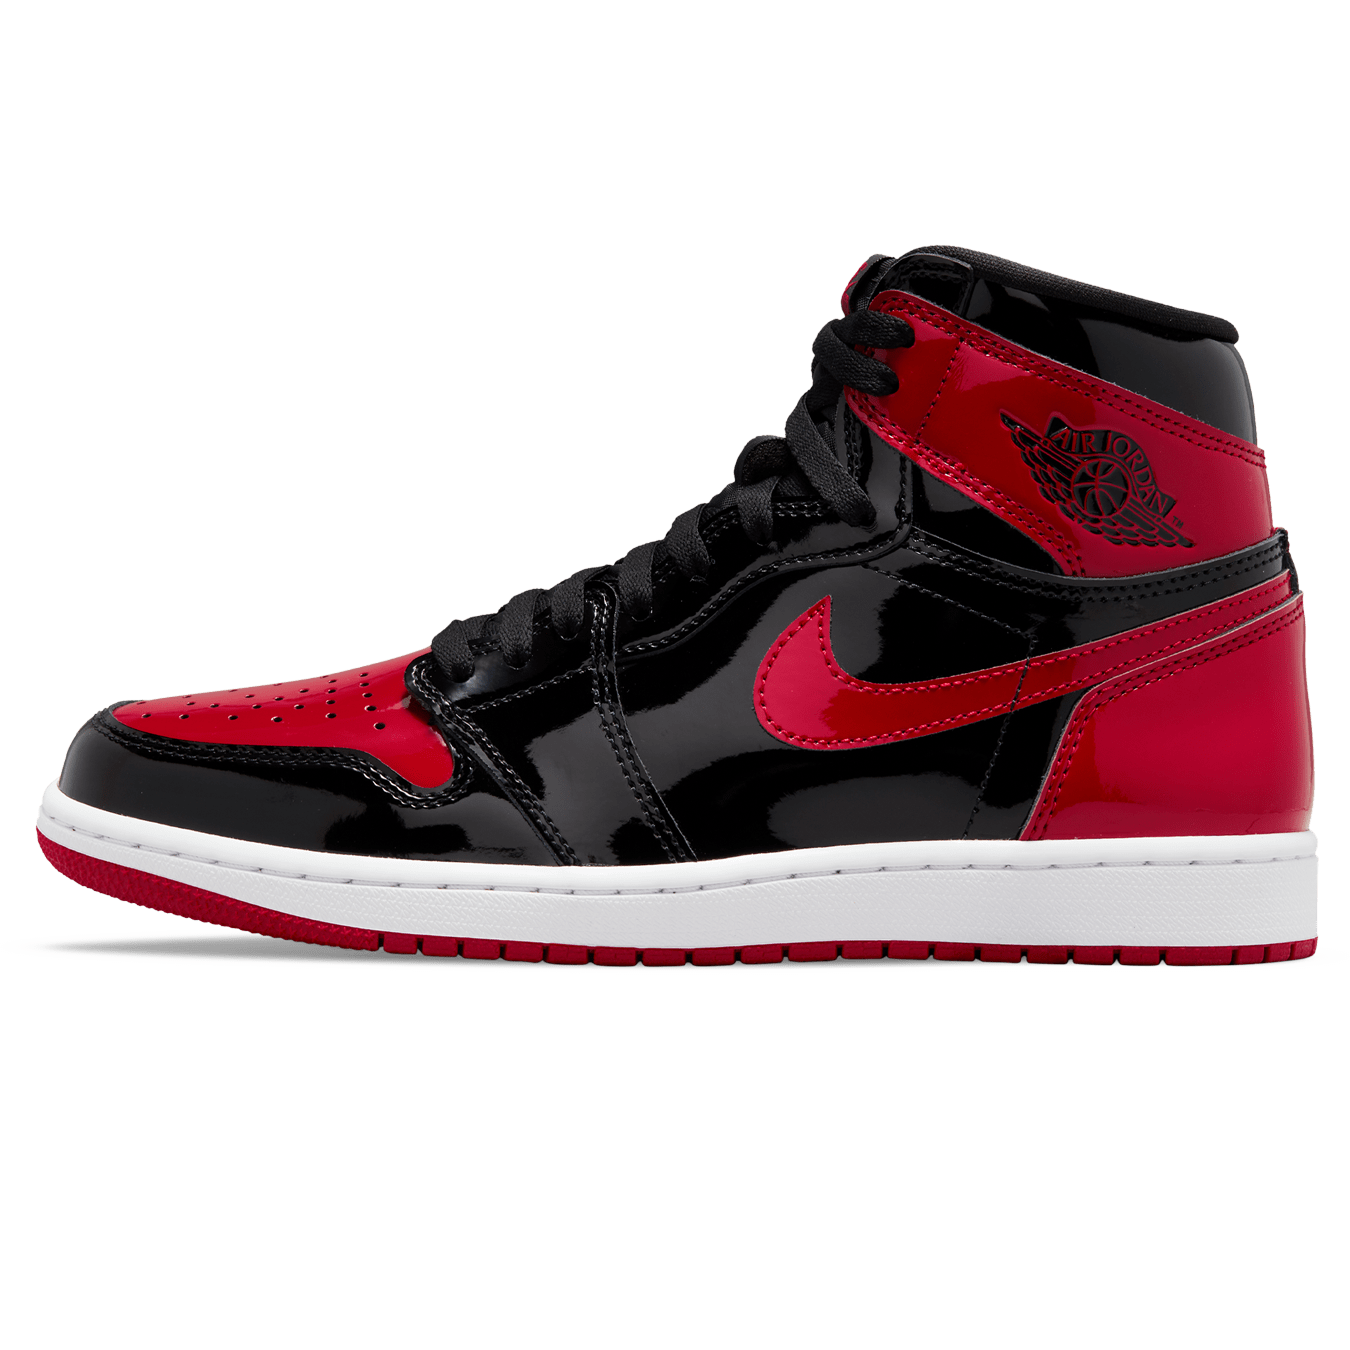 Double Boxed  299.99 Nike Air Jordan 1 High OG 'Patent Bred' Double Boxed